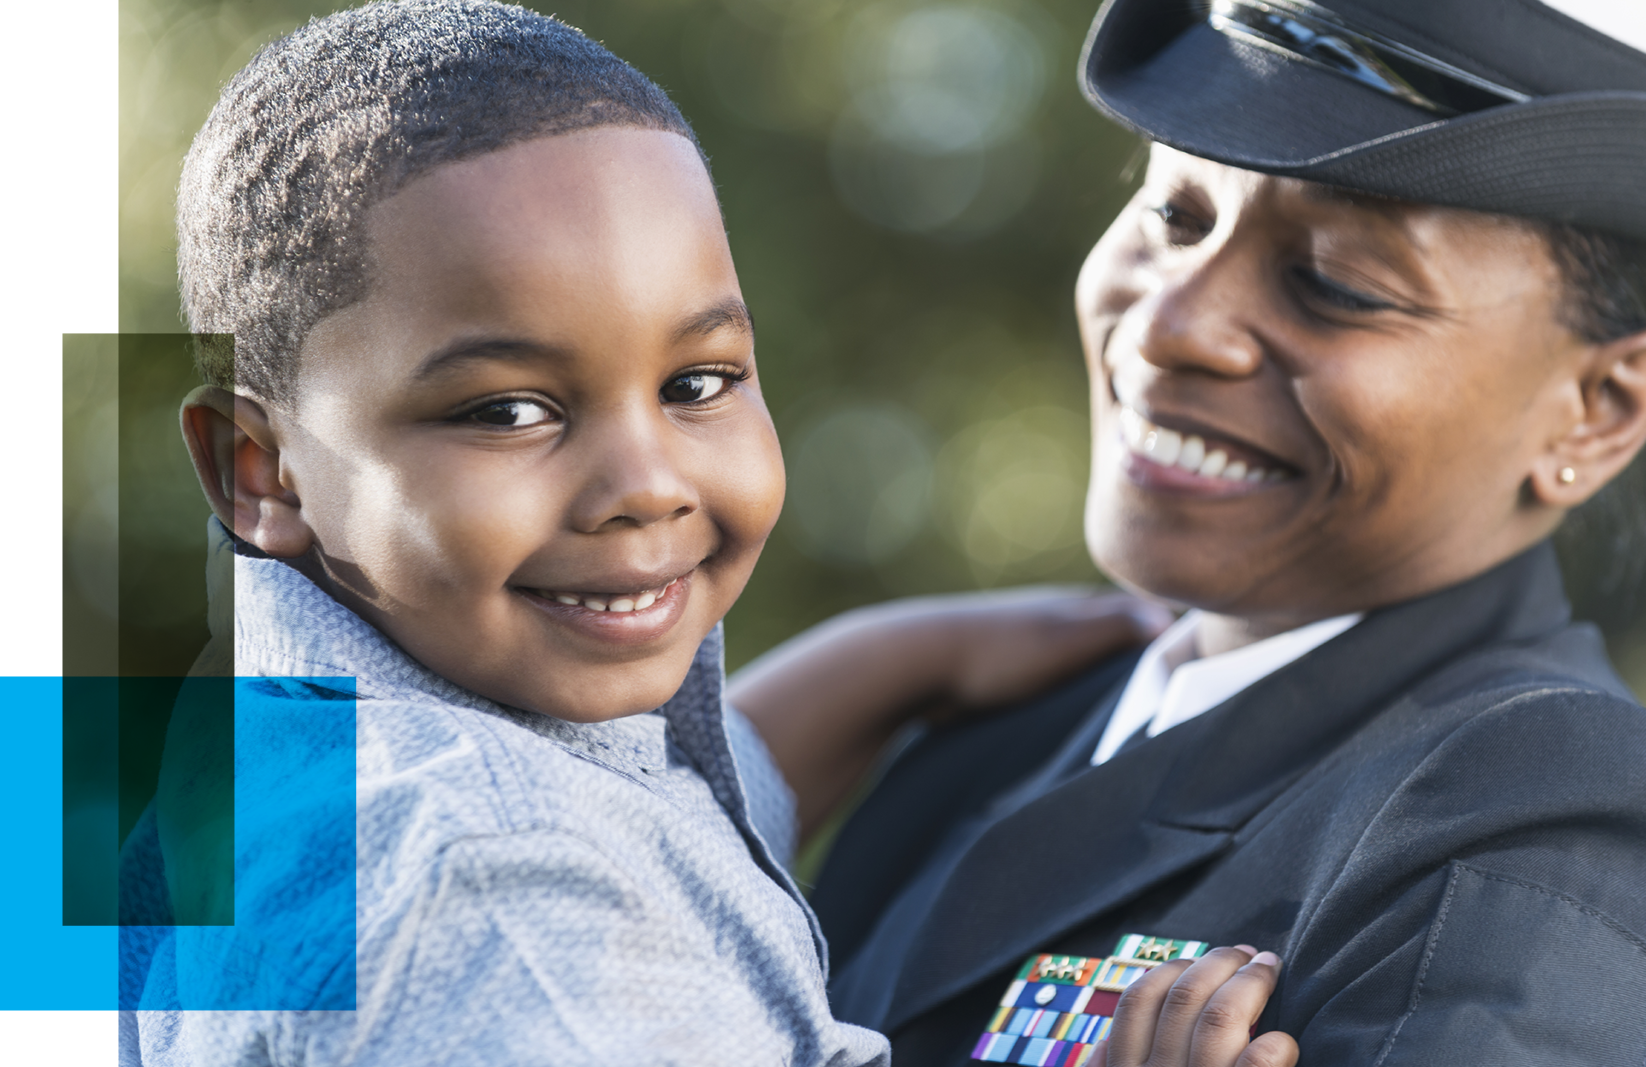 Image shows a black woman in naval uniform holding her child and smiling. The boy looks at the camera, also smiling.